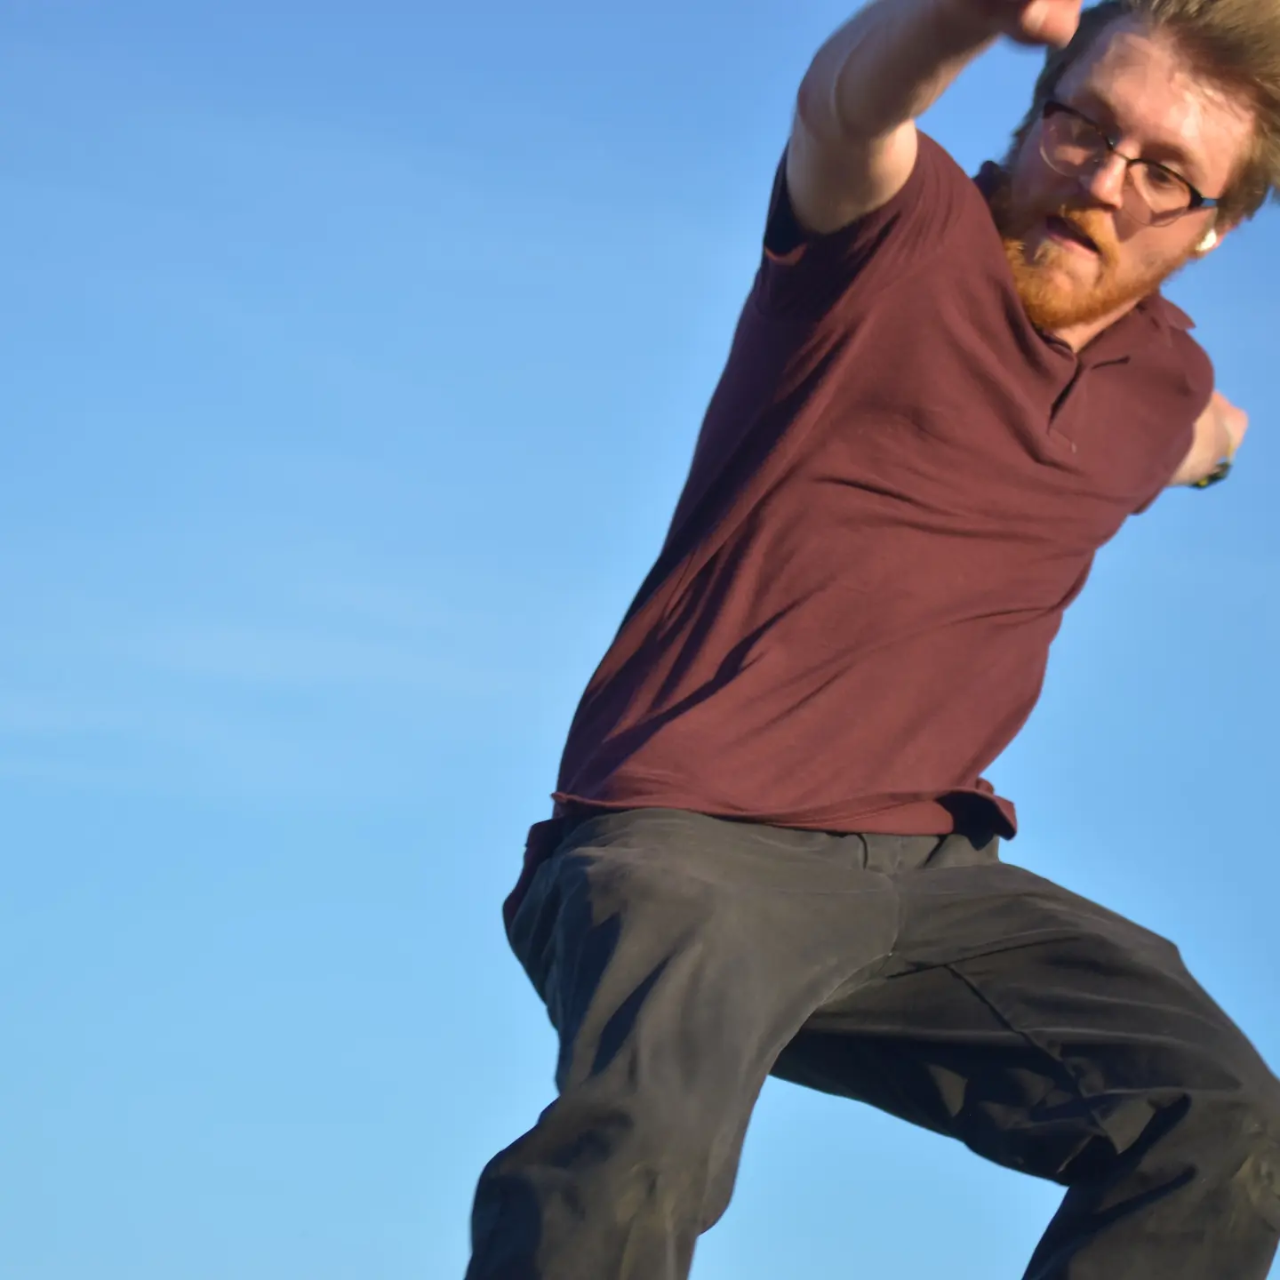 a young man with reddish hair, a beard, glasses and a maroon shirt is shown in the photo jumping up in the air, with a look of concentration on his face as he looks back at the ground. It almost looks like he is in the middle of a skateboard trick but the photo is tight, showing just his body mid-jump